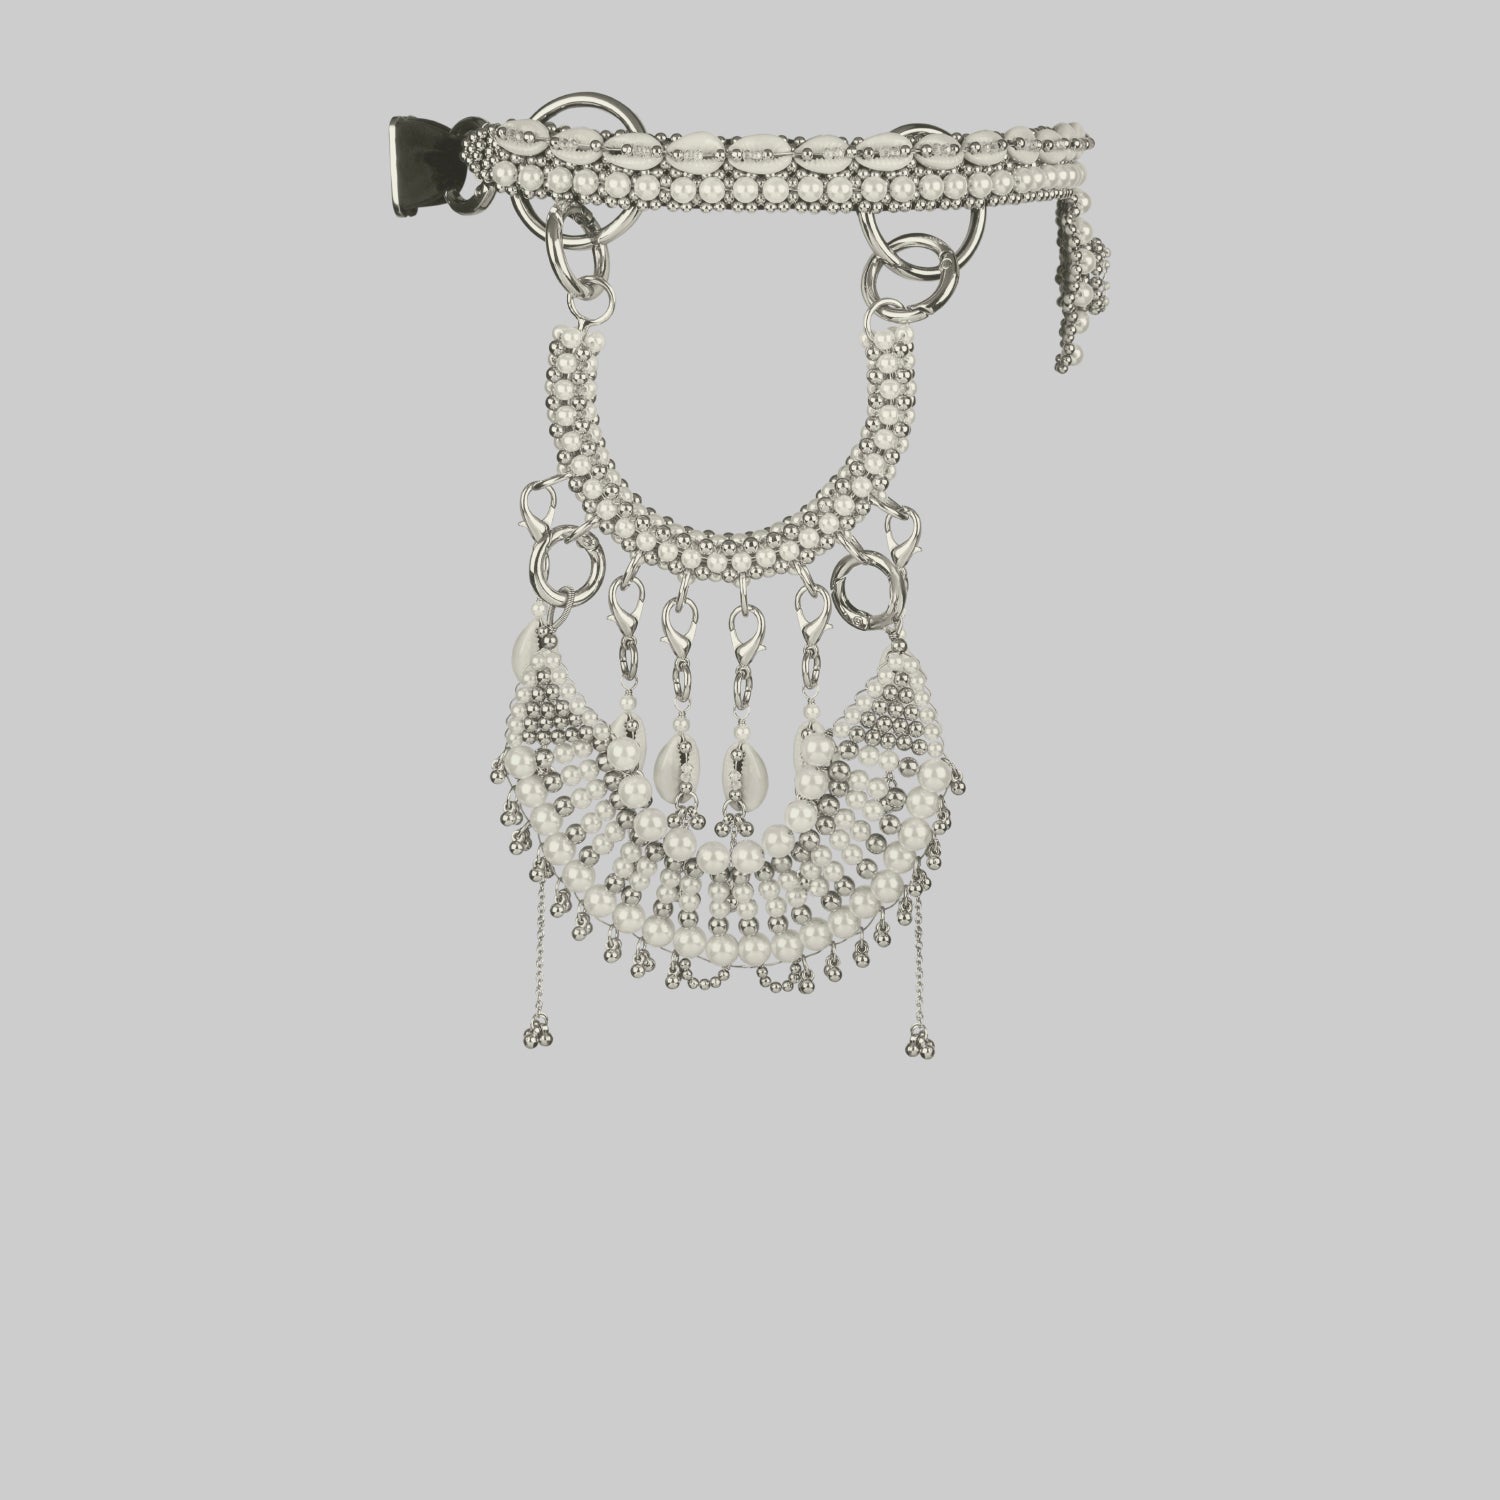 Rushi Headpiece System in Pearl